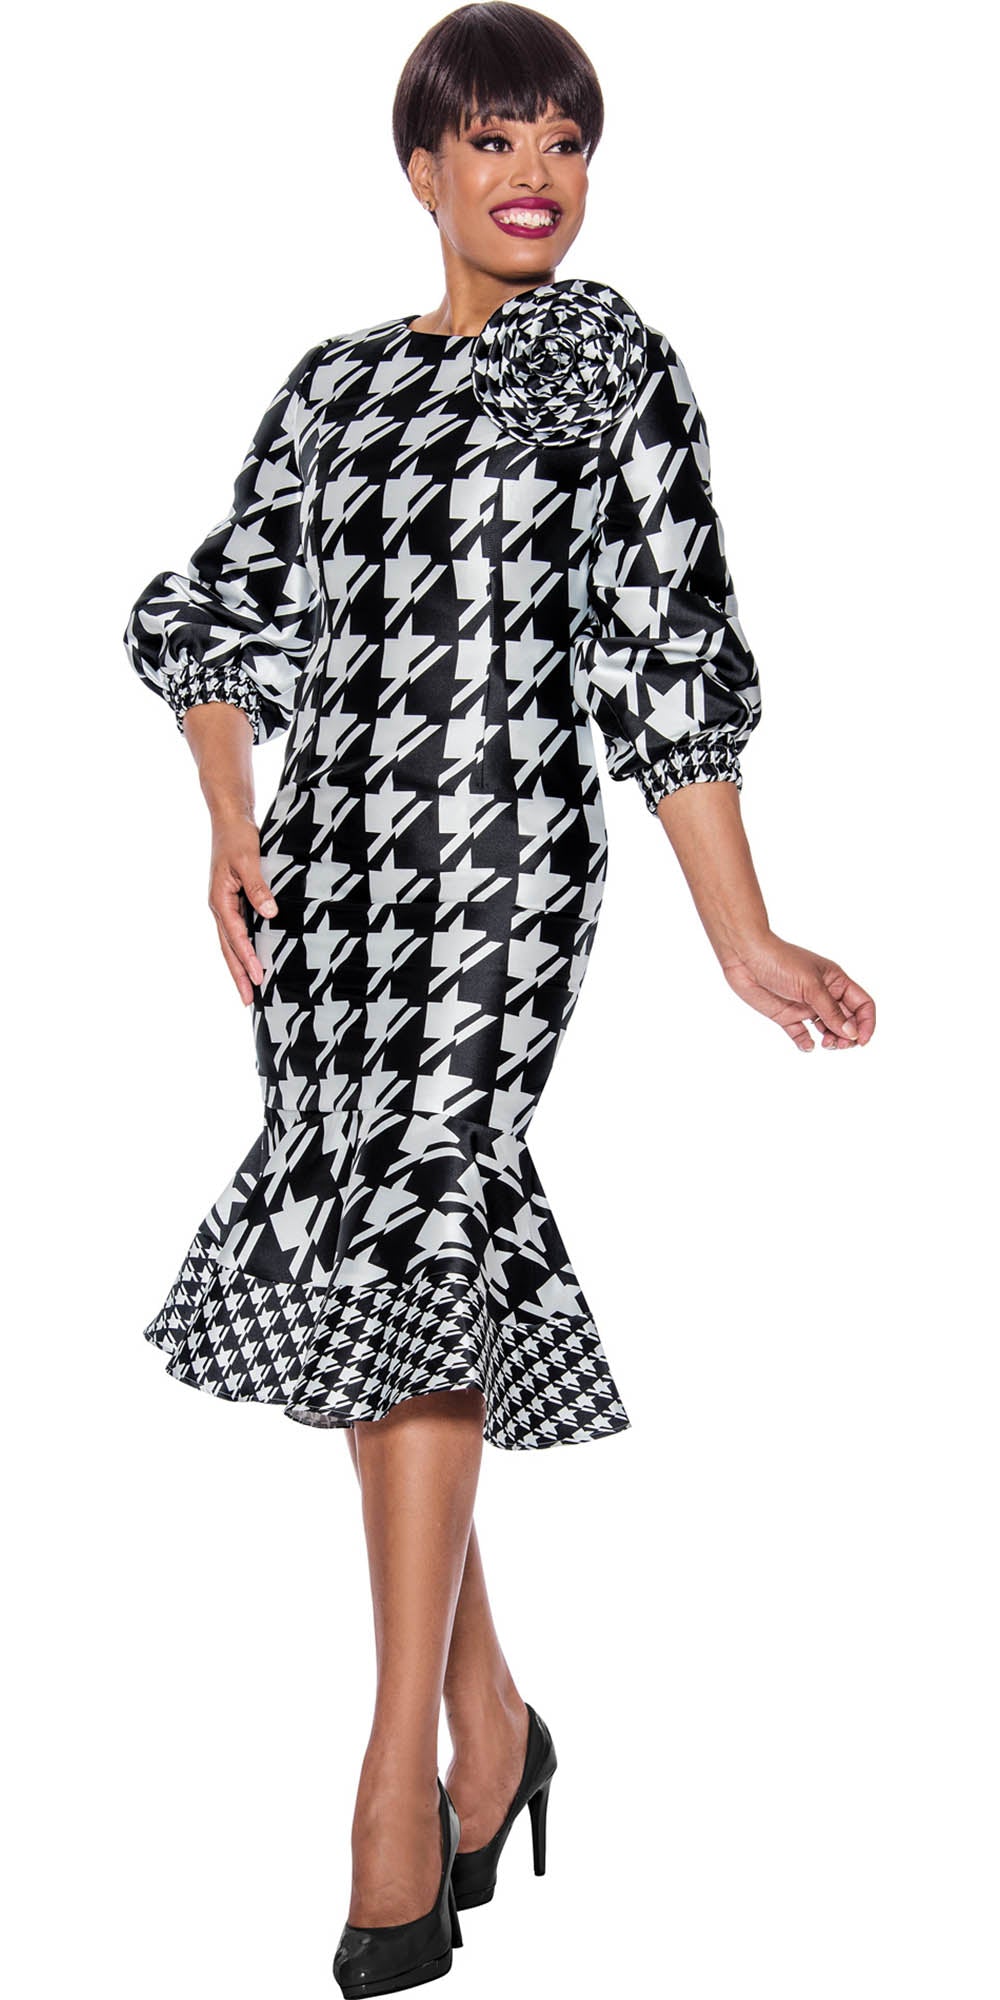 Dresses by Nubiano - 12101 - Black White - Houndstooth Twill Dress